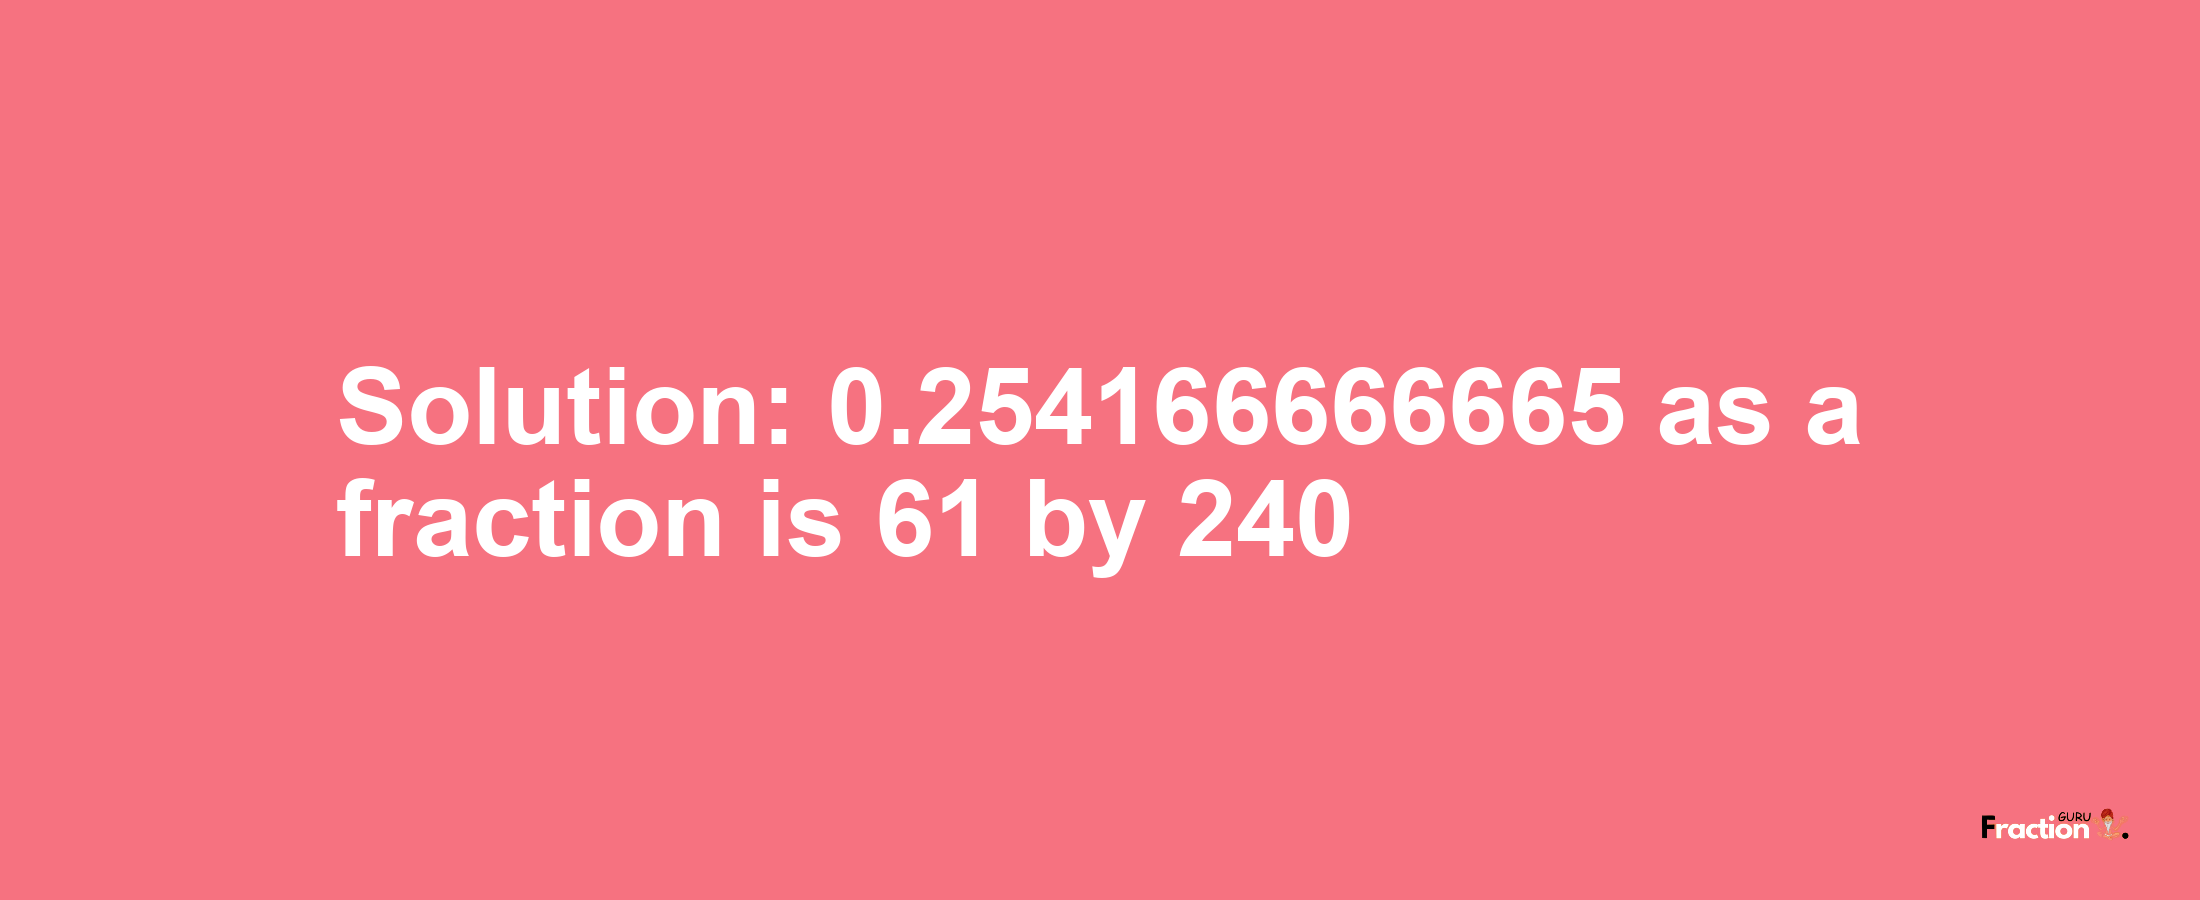 Solution:0.254166666665 as a fraction is 61/240